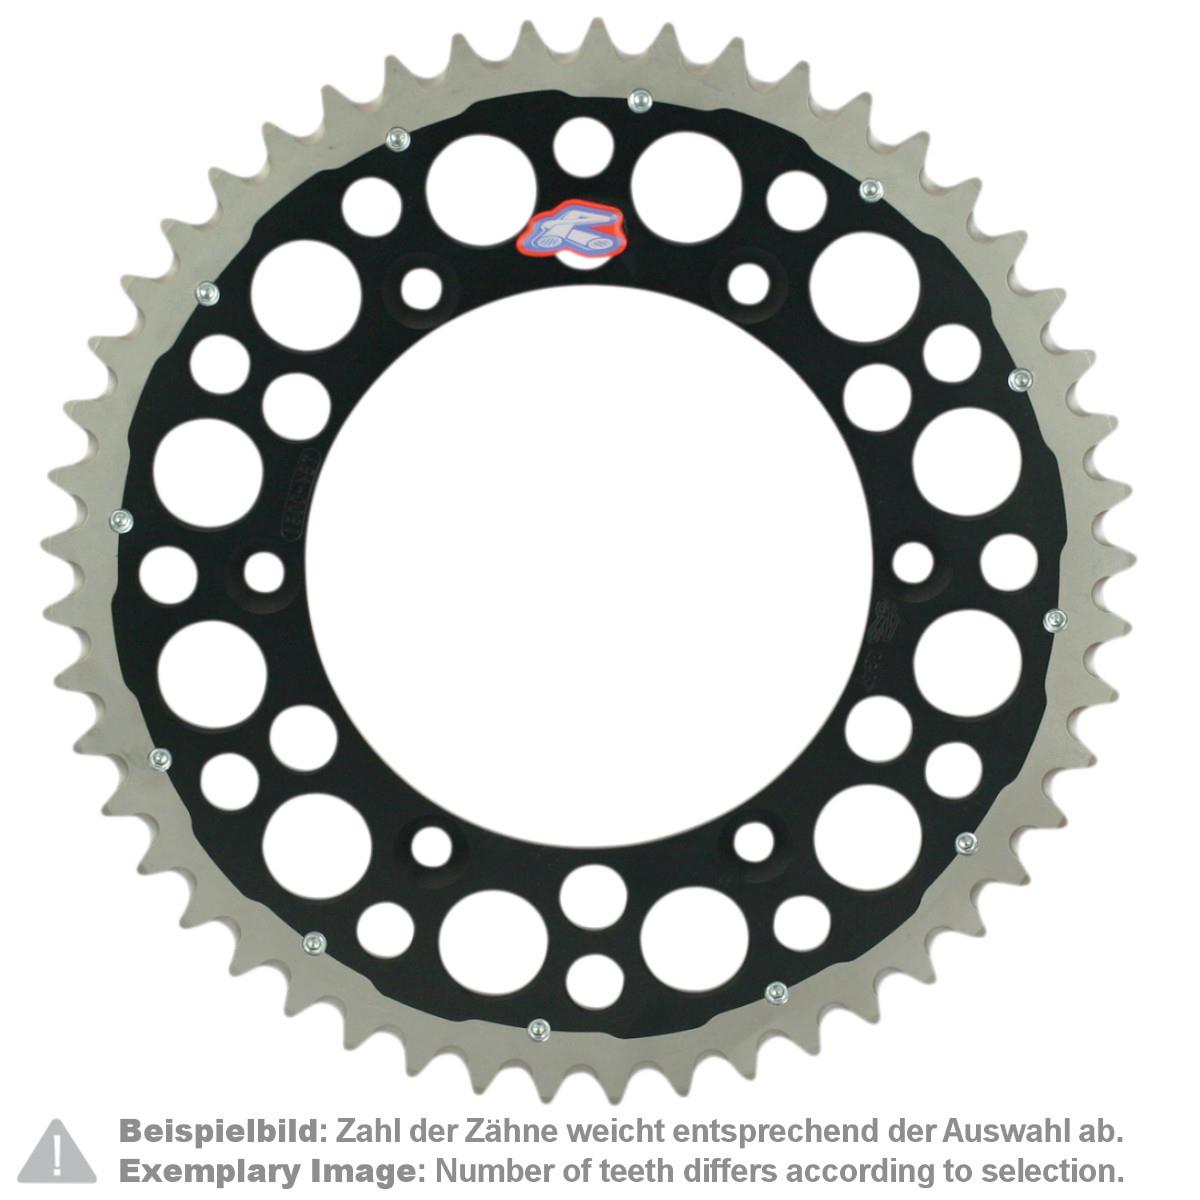 NEW Renthal Rear Sprocket for Husqvarna TC250 2014-2020 48T 48 tooth BLUE